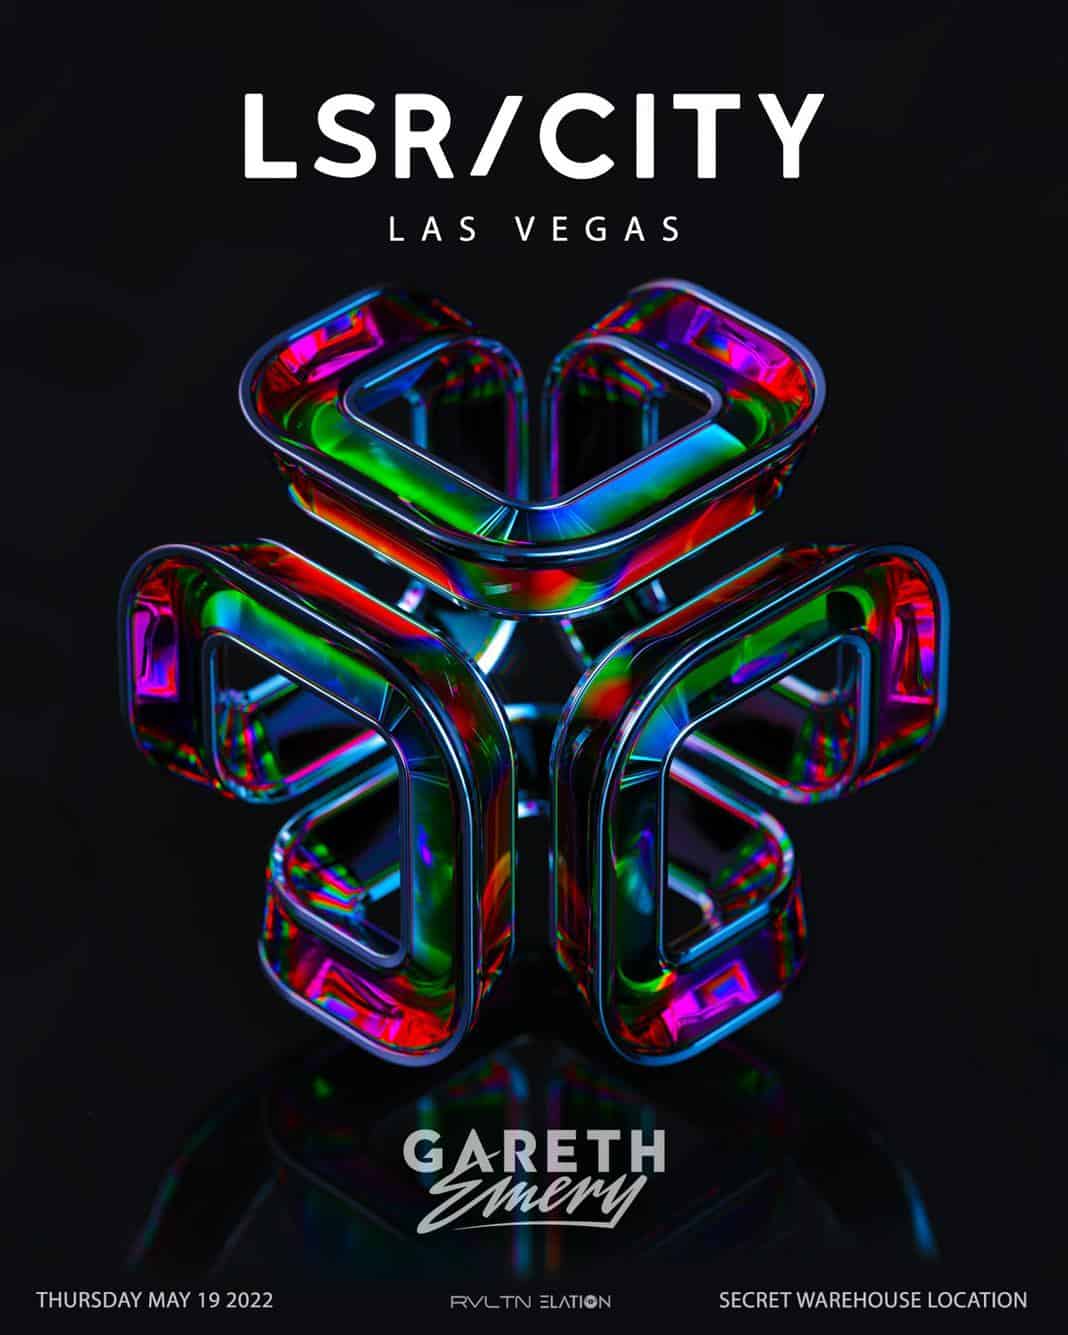 Gareth Emery to Debut LSR/CITY show during EDC Week 2022 on Thursday May 19